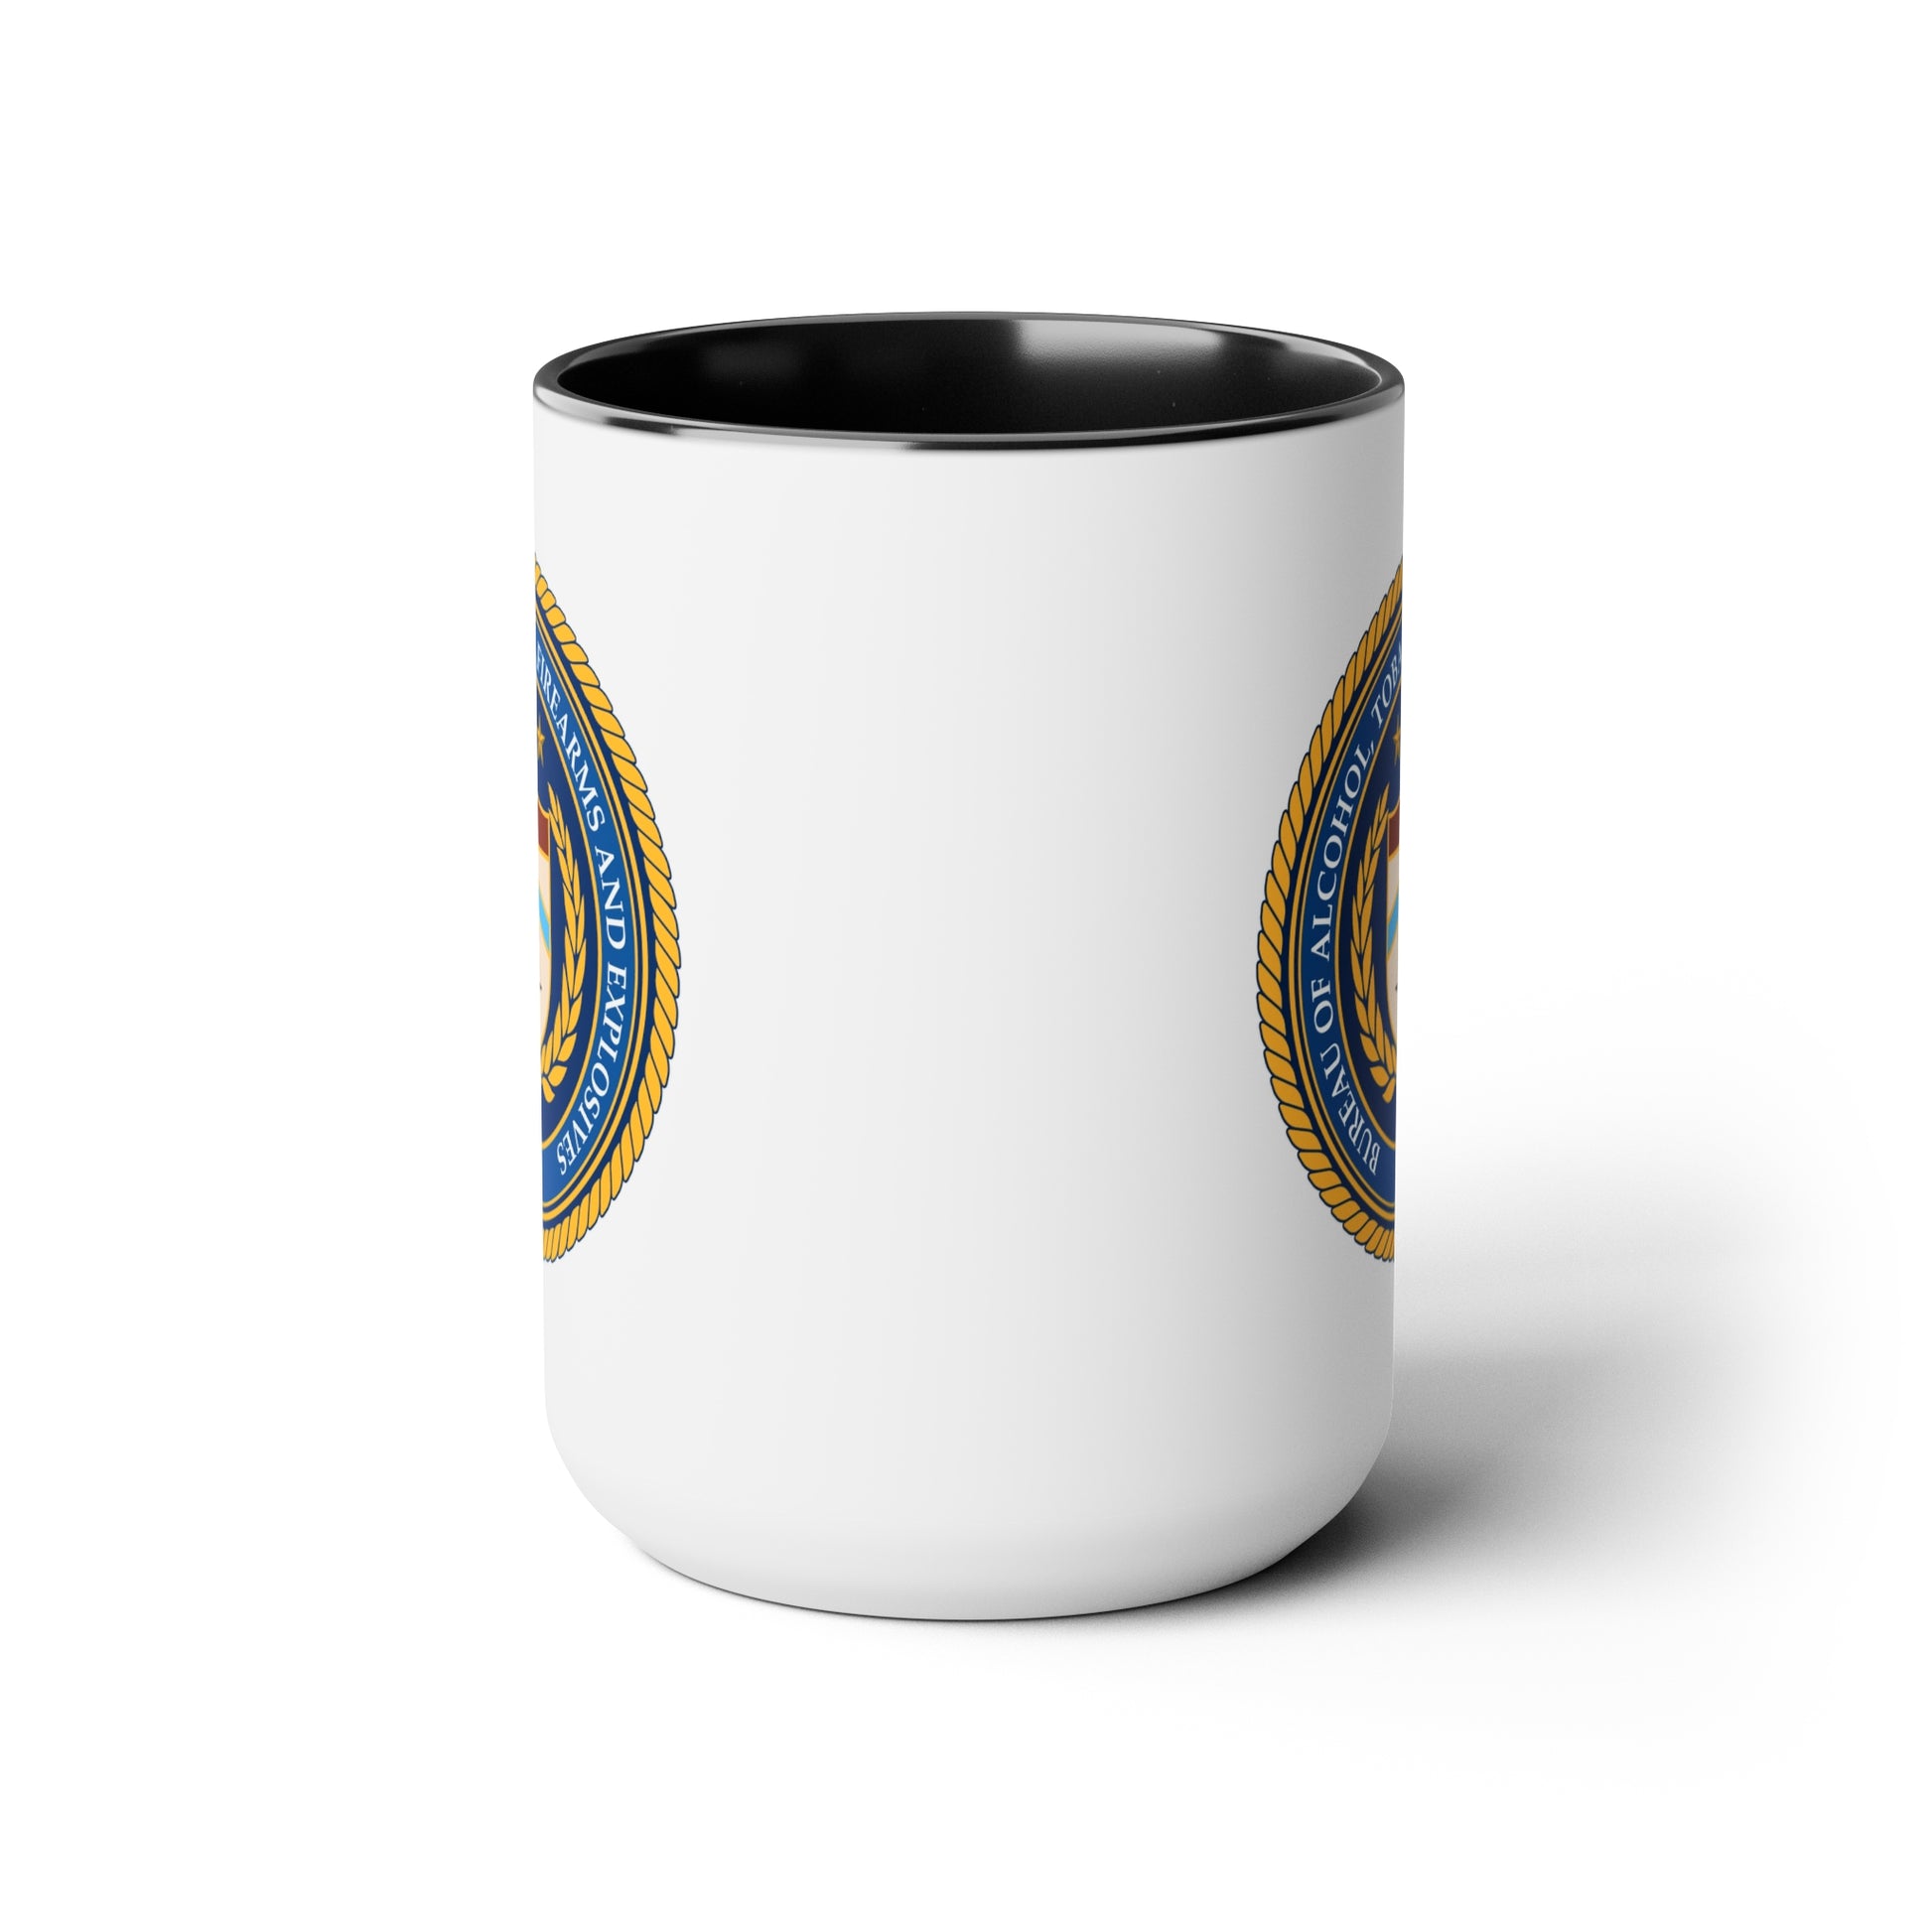 US ATF Seal Coffee Mug - Double Sided Black Accent White Ceramic 15oz by TheGlassyLass